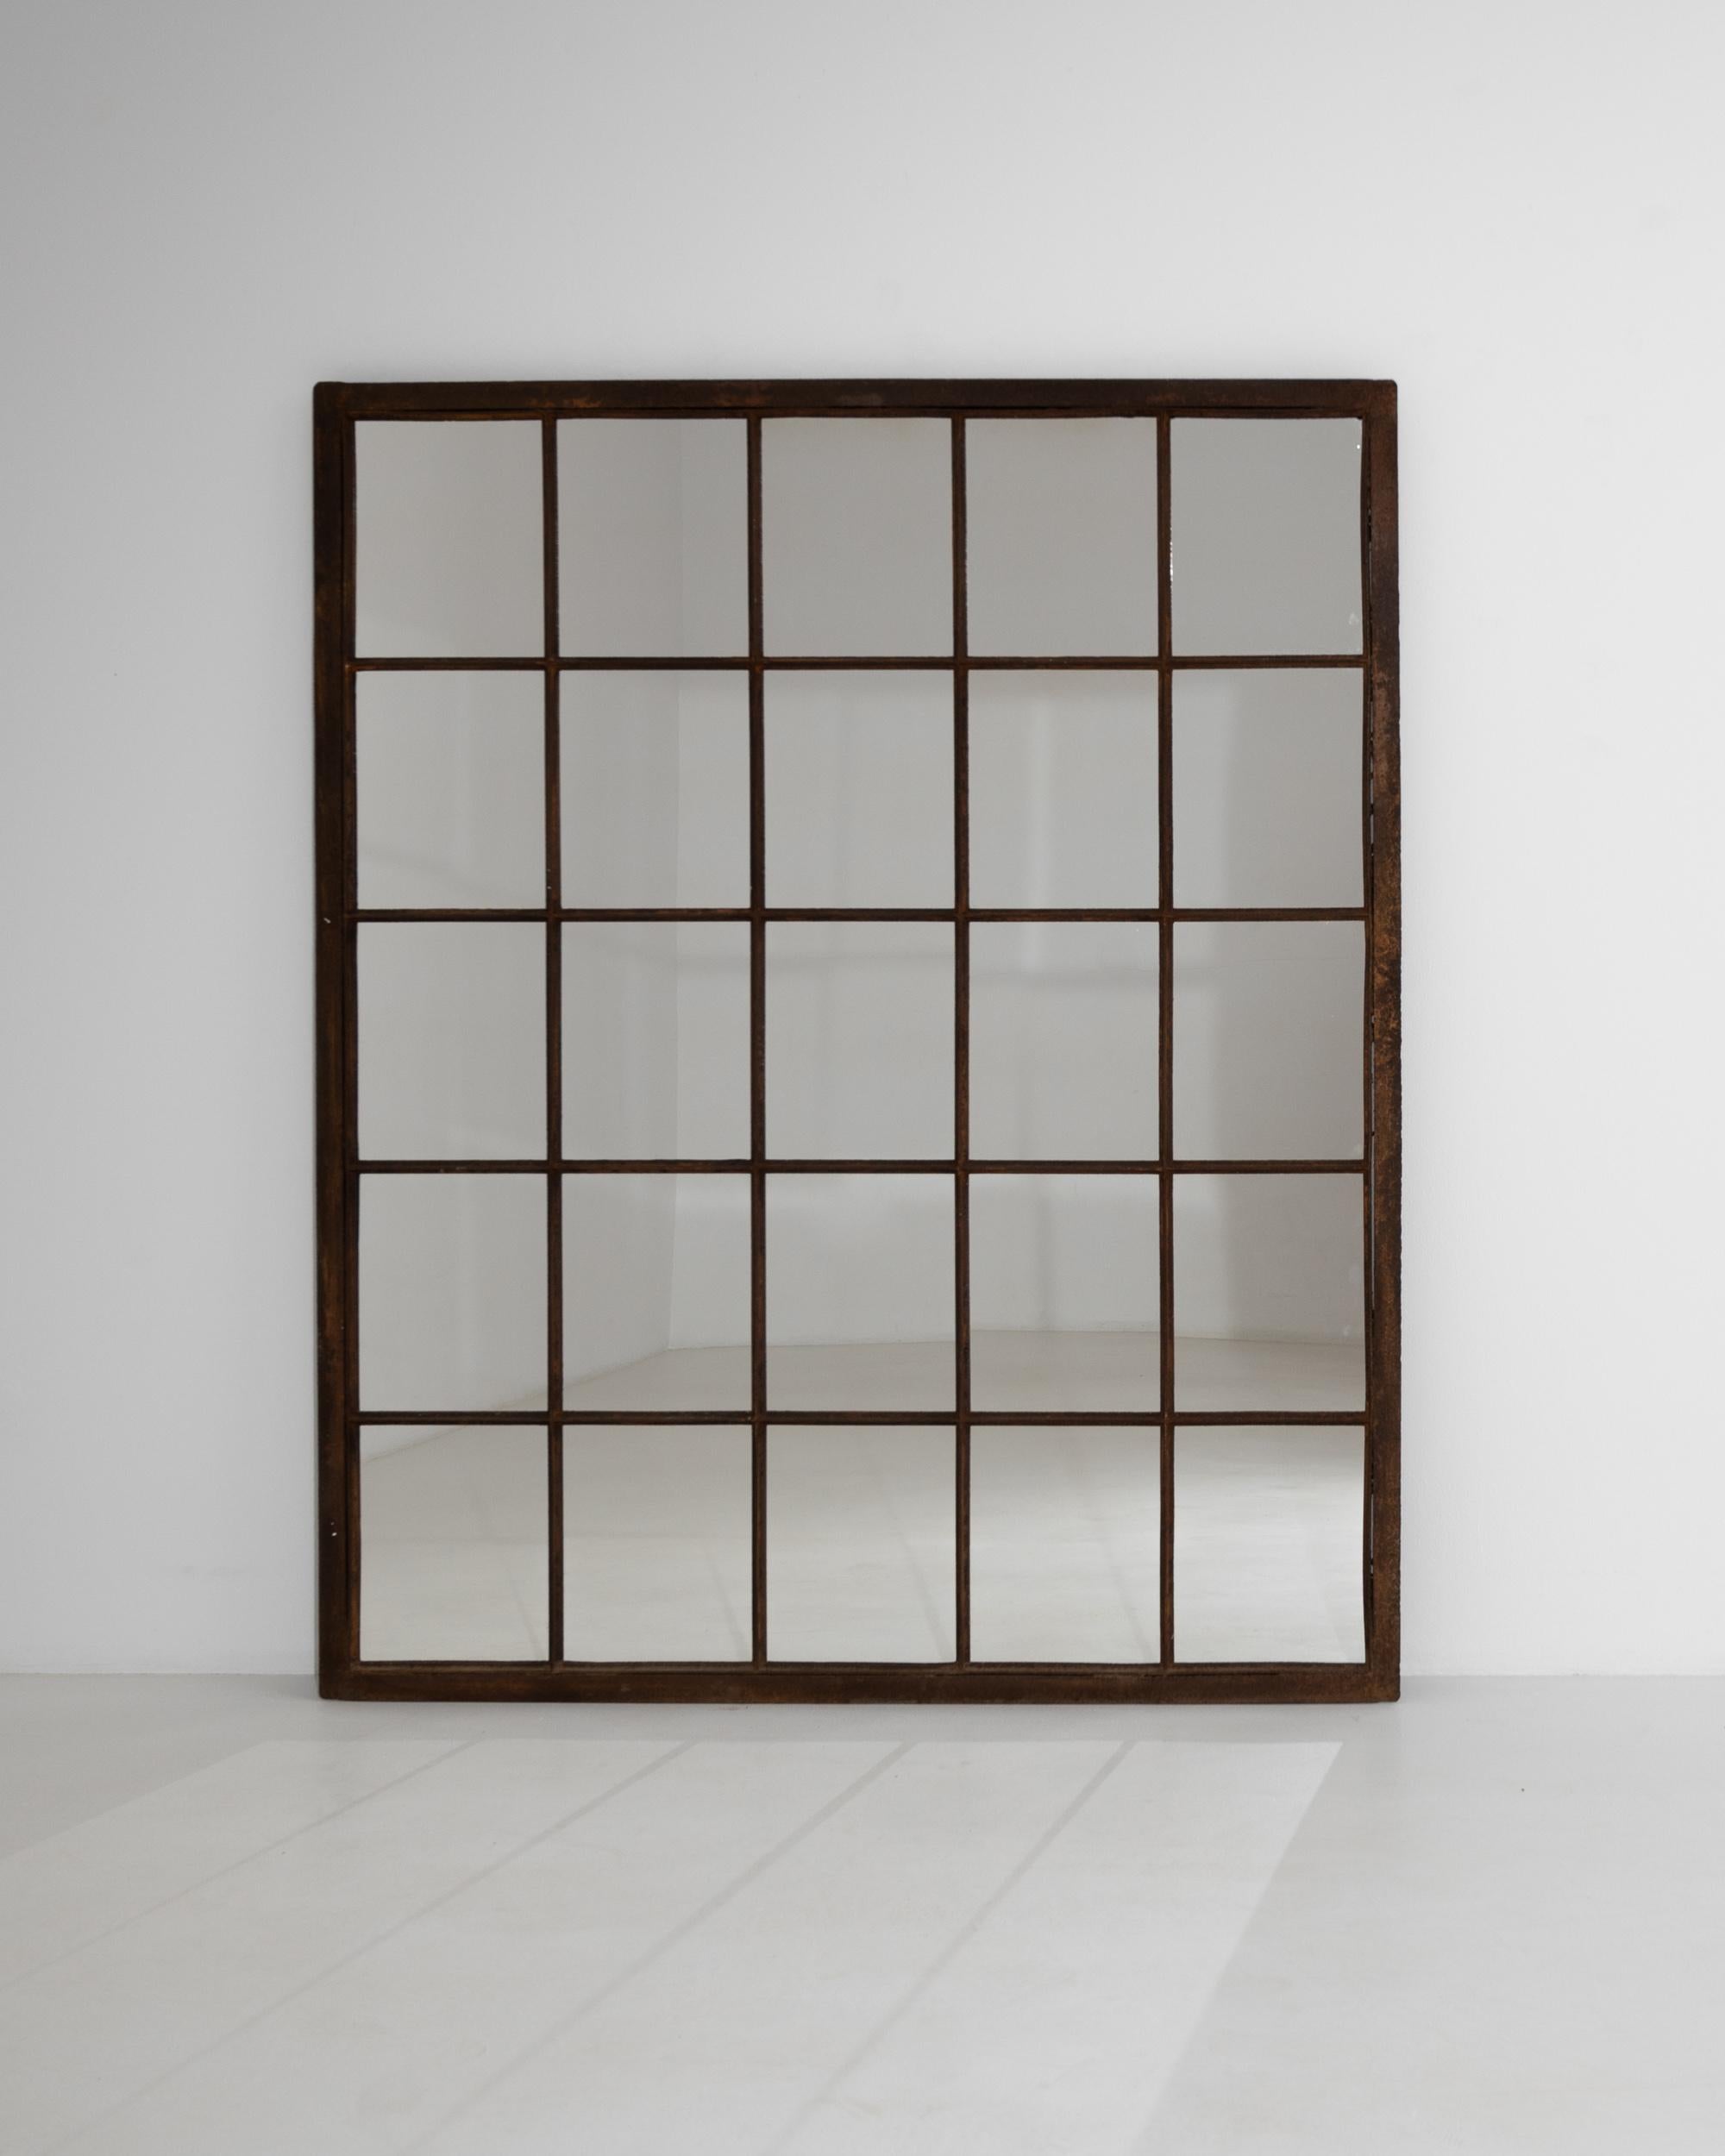 Originally used in a factory, the generous size and stripped back simplicity of this vintage mirror makes for a unique Industrial accent. Made in 20th century France, the grid-like form mimics a mullioned window, while the large proportions act to